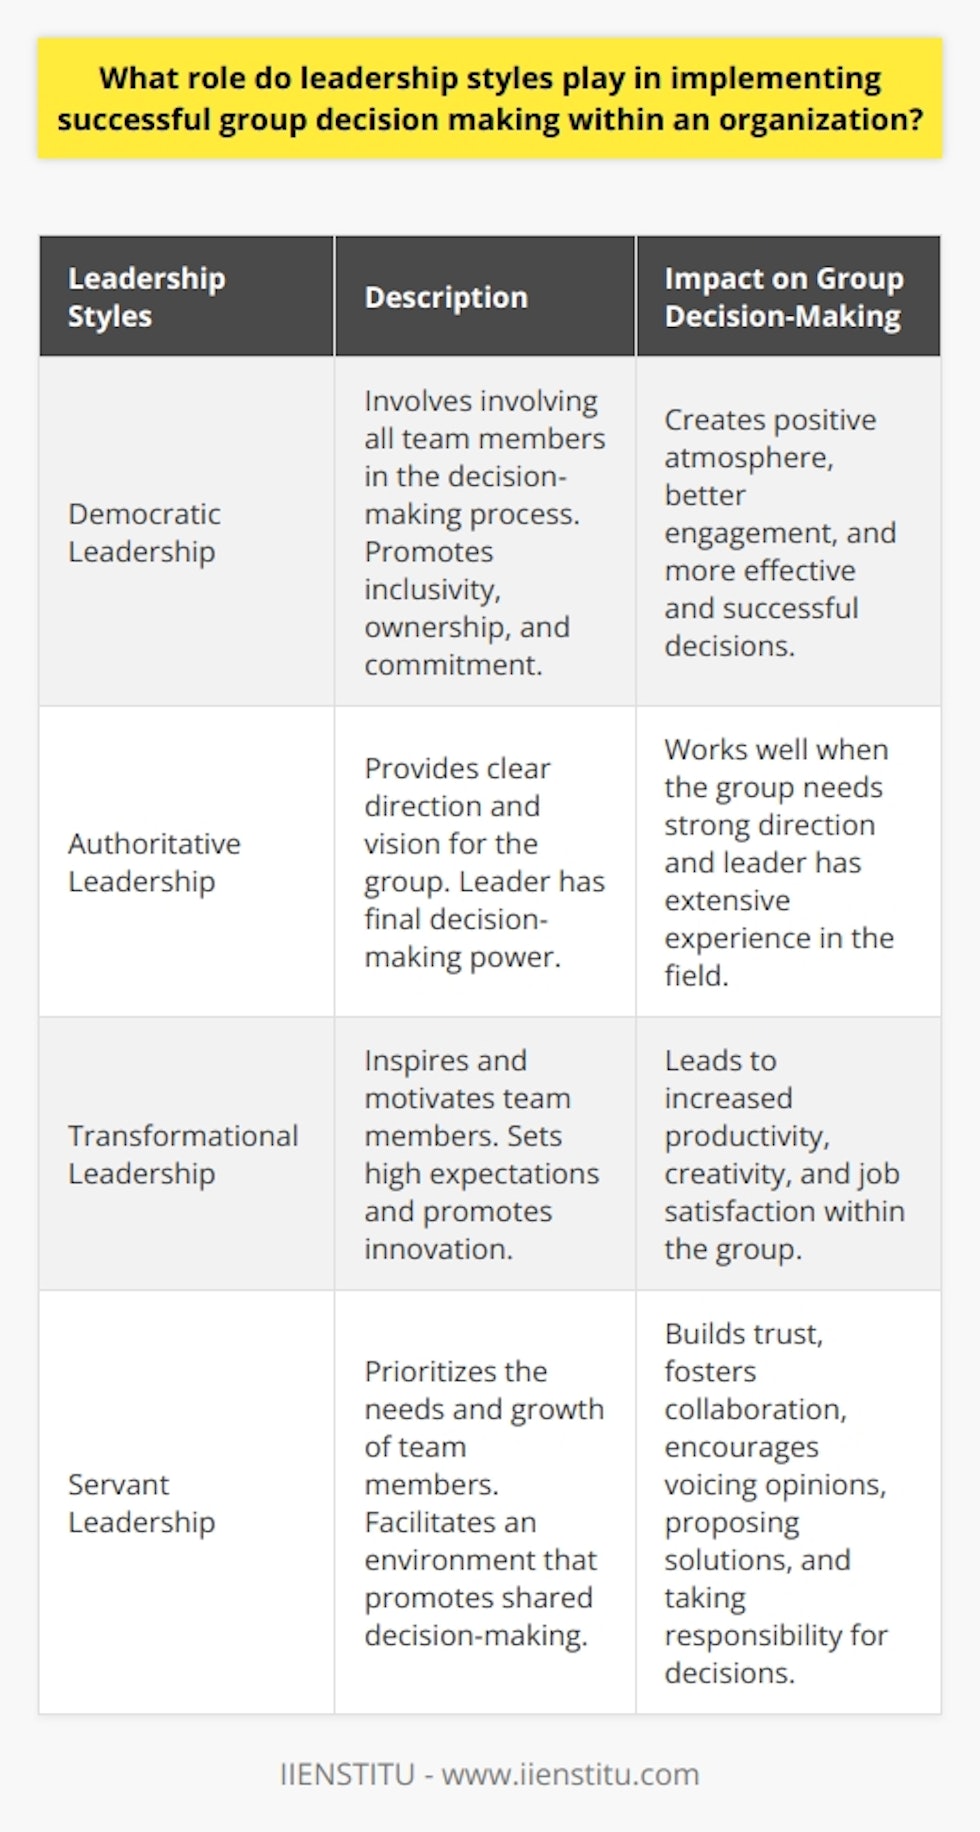 Leadership styles play a crucial role in implementing successful group decision-making within an organization. The right leadership style can ensure collaborative and efficient decision-making processes within teams. Four common leadership styles that impact group decision-making include democratic leadership, authoritative leadership, transformational leadership, and servant leadership.Democratic leadership involves involving all team members in the decision-making process. This style encourages input from all group members, fostering a sense of ownership and commitment. By promoting an inclusive approach, democratic leaders create a positive atmosphere and better engagement, leading to more effective and successful decisions.Authoritative leadership, on the other hand, focuses on providing clear direction and vision for the group. While input from team members may be taken into consideration, the final decision-making power rests with the leader. This style works well when the group needs a strong sense of direction, and the leader has extensive experience in the field to make informed decisions.Transformational leadership inspires and motivates team members by setting high expectations and promoting innovation. These leaders empower employees by providing the necessary support and resources for successful decision-making. This style often leads to increased productivity, creativity, and job satisfaction within the group.Servant leadership prioritizes the needs and growth of team members. This style facilitates an environment that promotes shared decision-making. By building trust and fostering collaboration, servant leaders create a supportive atmosphere in which group members are more likely to voice opinions, propose solutions, and take responsibility for the decisions made.Choosing the right leadership style depends on factors such as organizational culture, team dynamics, and the complexity of the problem being addressed. Effective leaders must possess the ability to adapt their leadership style based on the context to implement successful group decision-making. By being flexible, conscious of team needs, and fostering an inclusive environment, leaders can greatly enhance decision-making processes, contributing to the overall success of the organization.